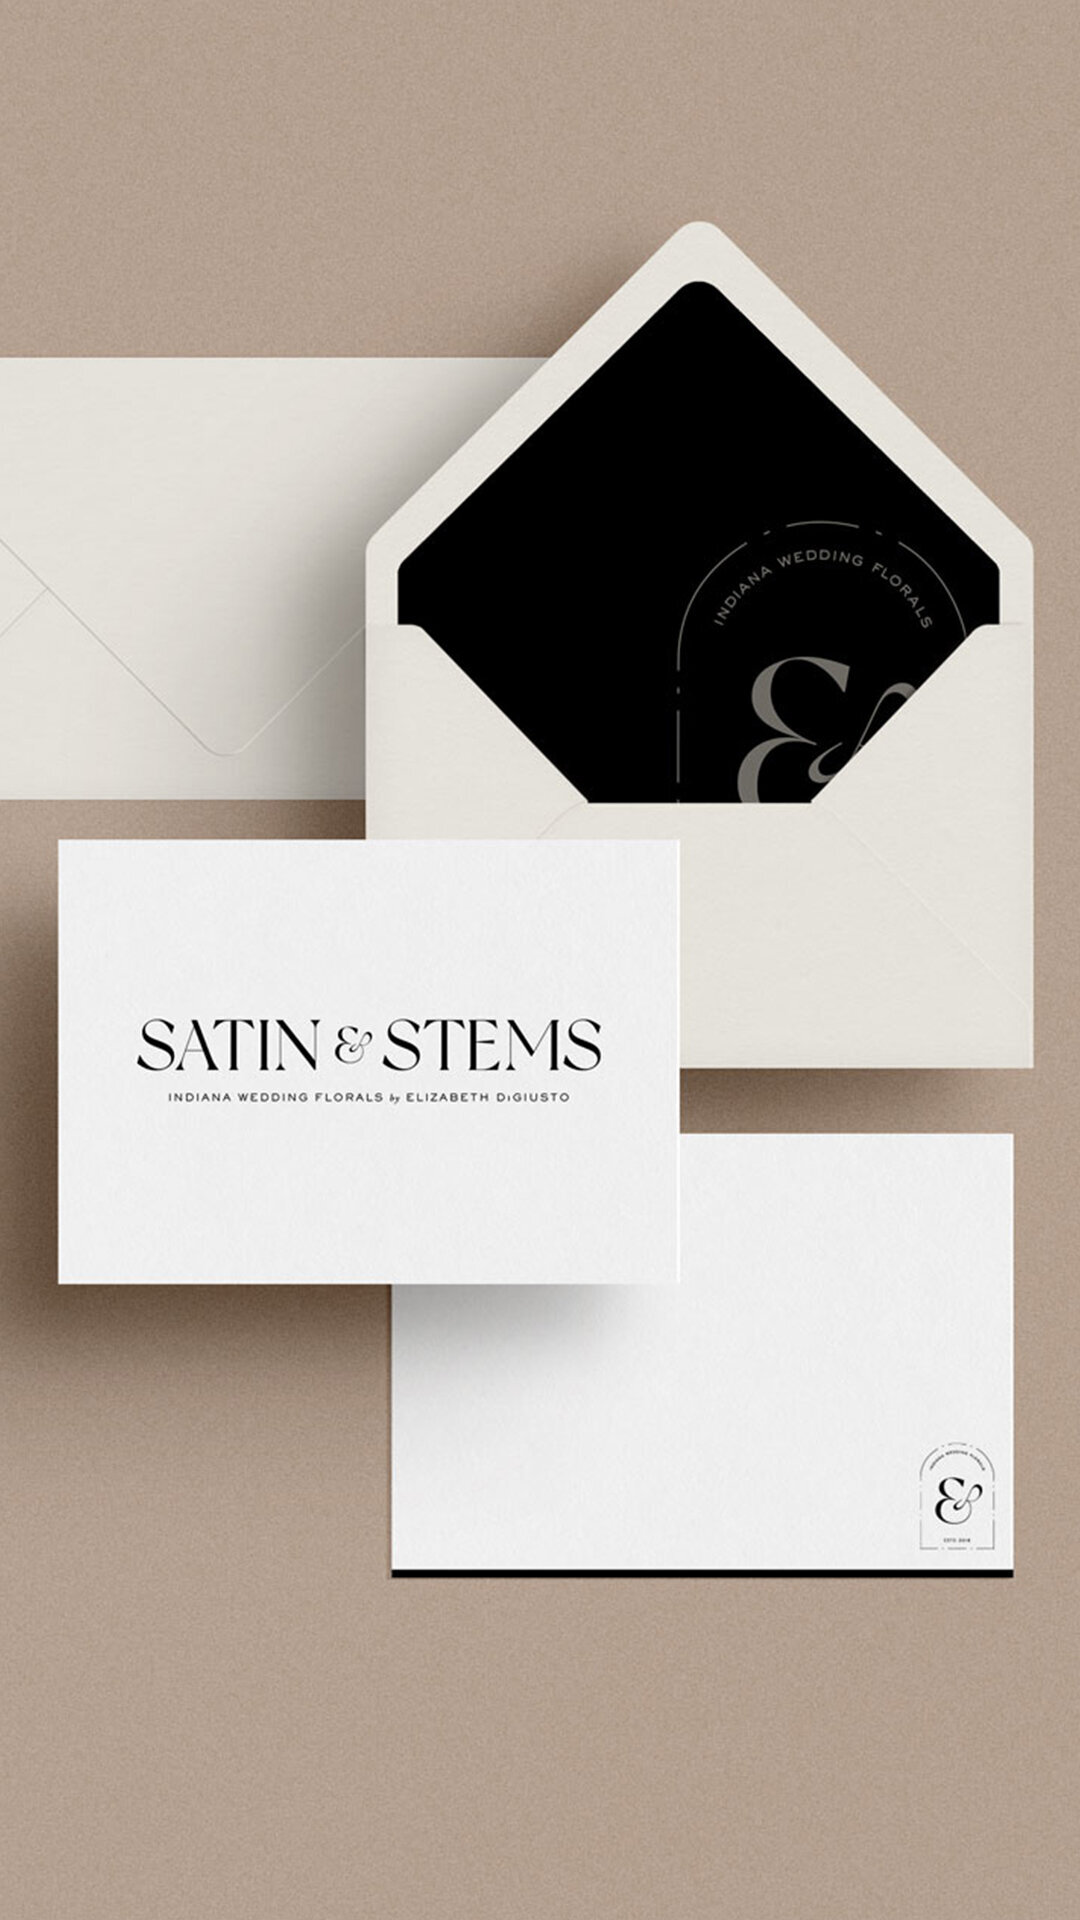 a mockup showing classic branding on black, white, and neutral stationery